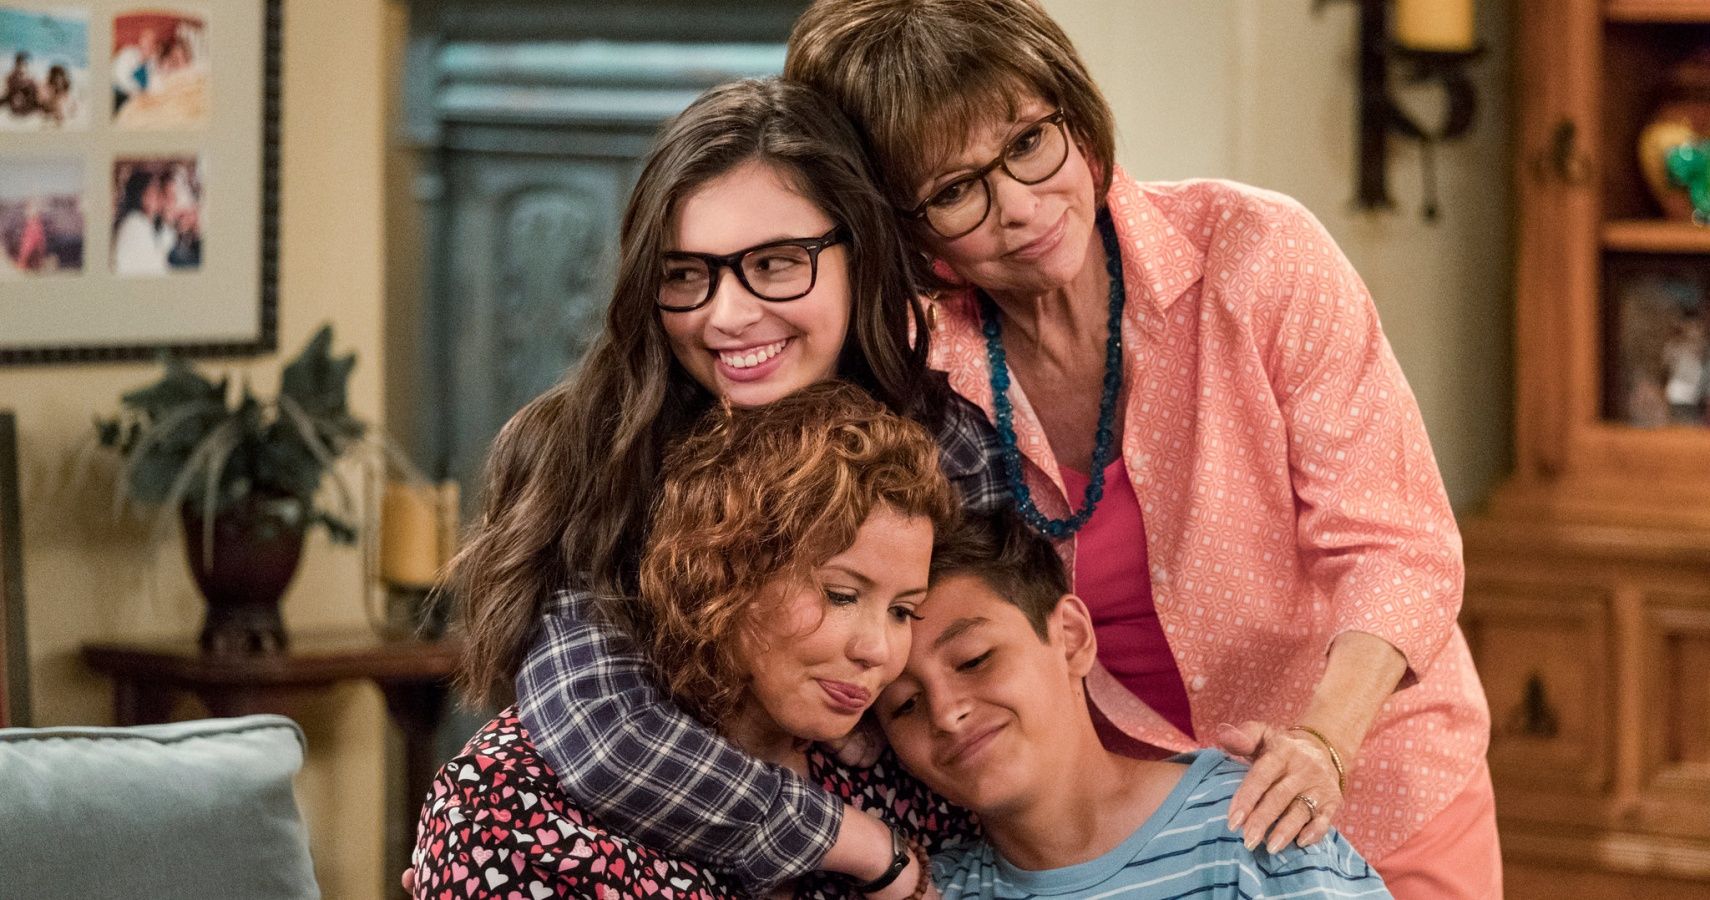 10 Best Episodes Of One Day At A Time According To IMDb